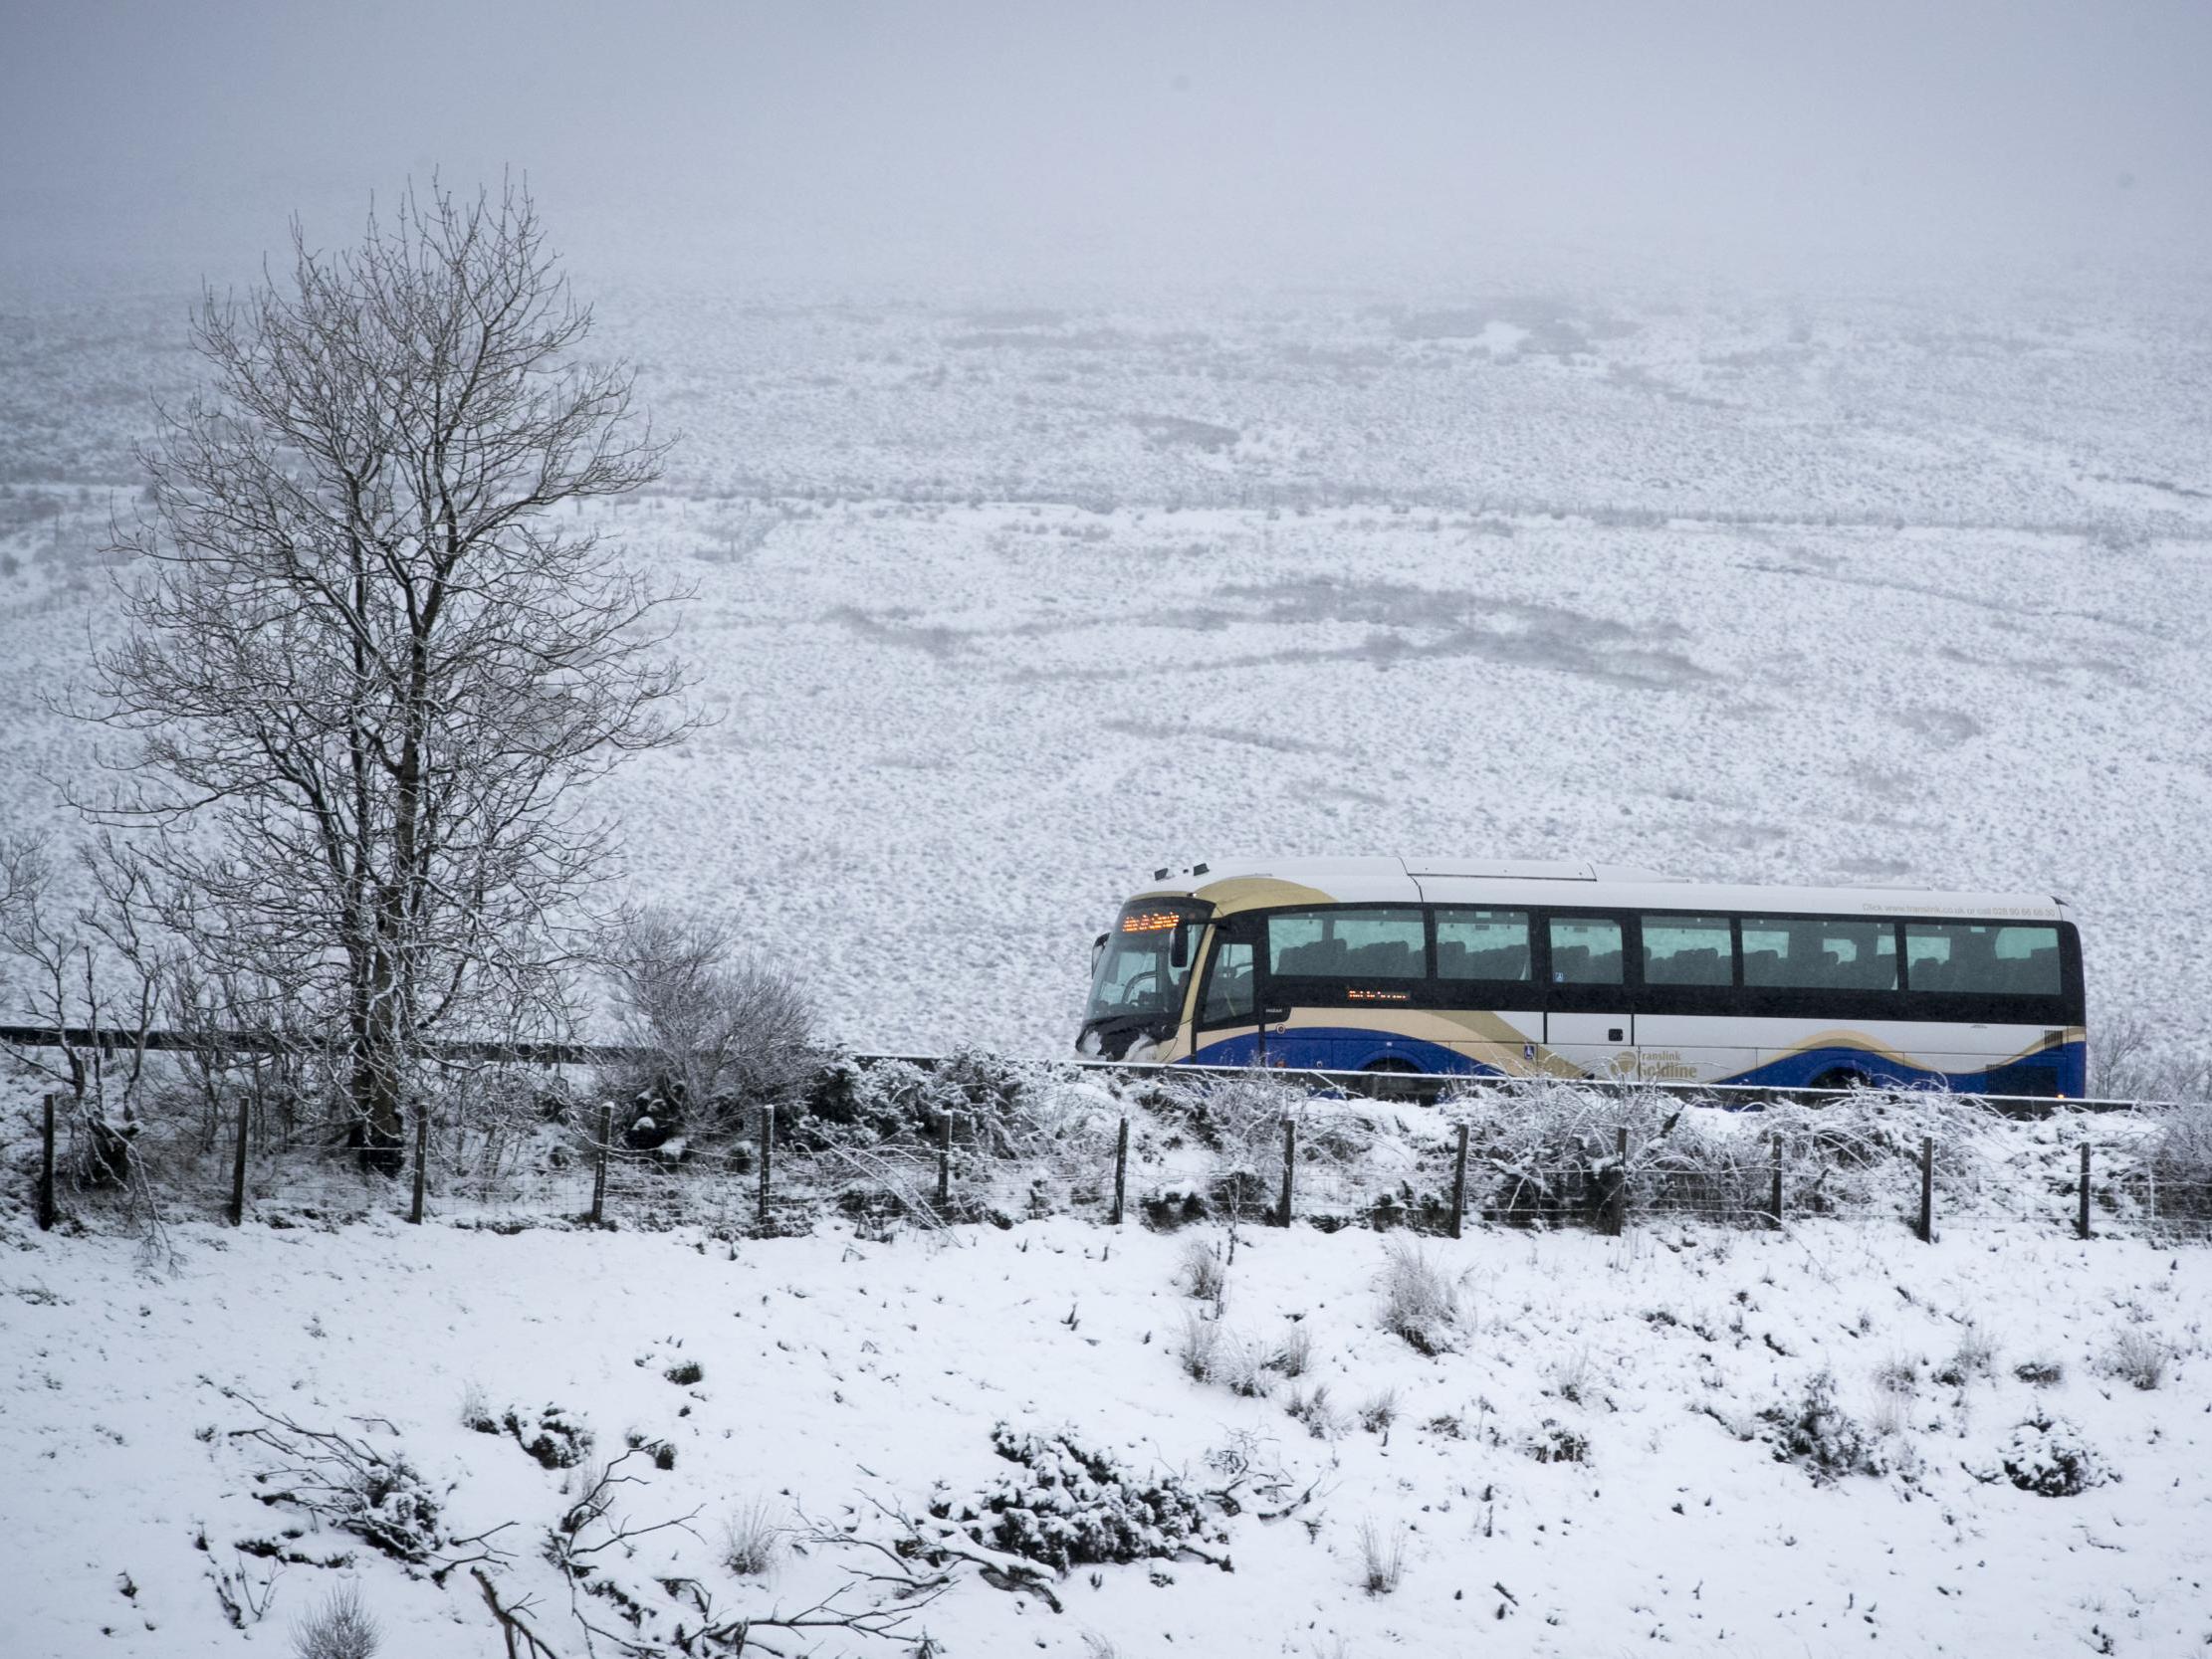 UK snow forecast: Met Office issues weather warnings as freezing conditions sweep country and temperatures fall